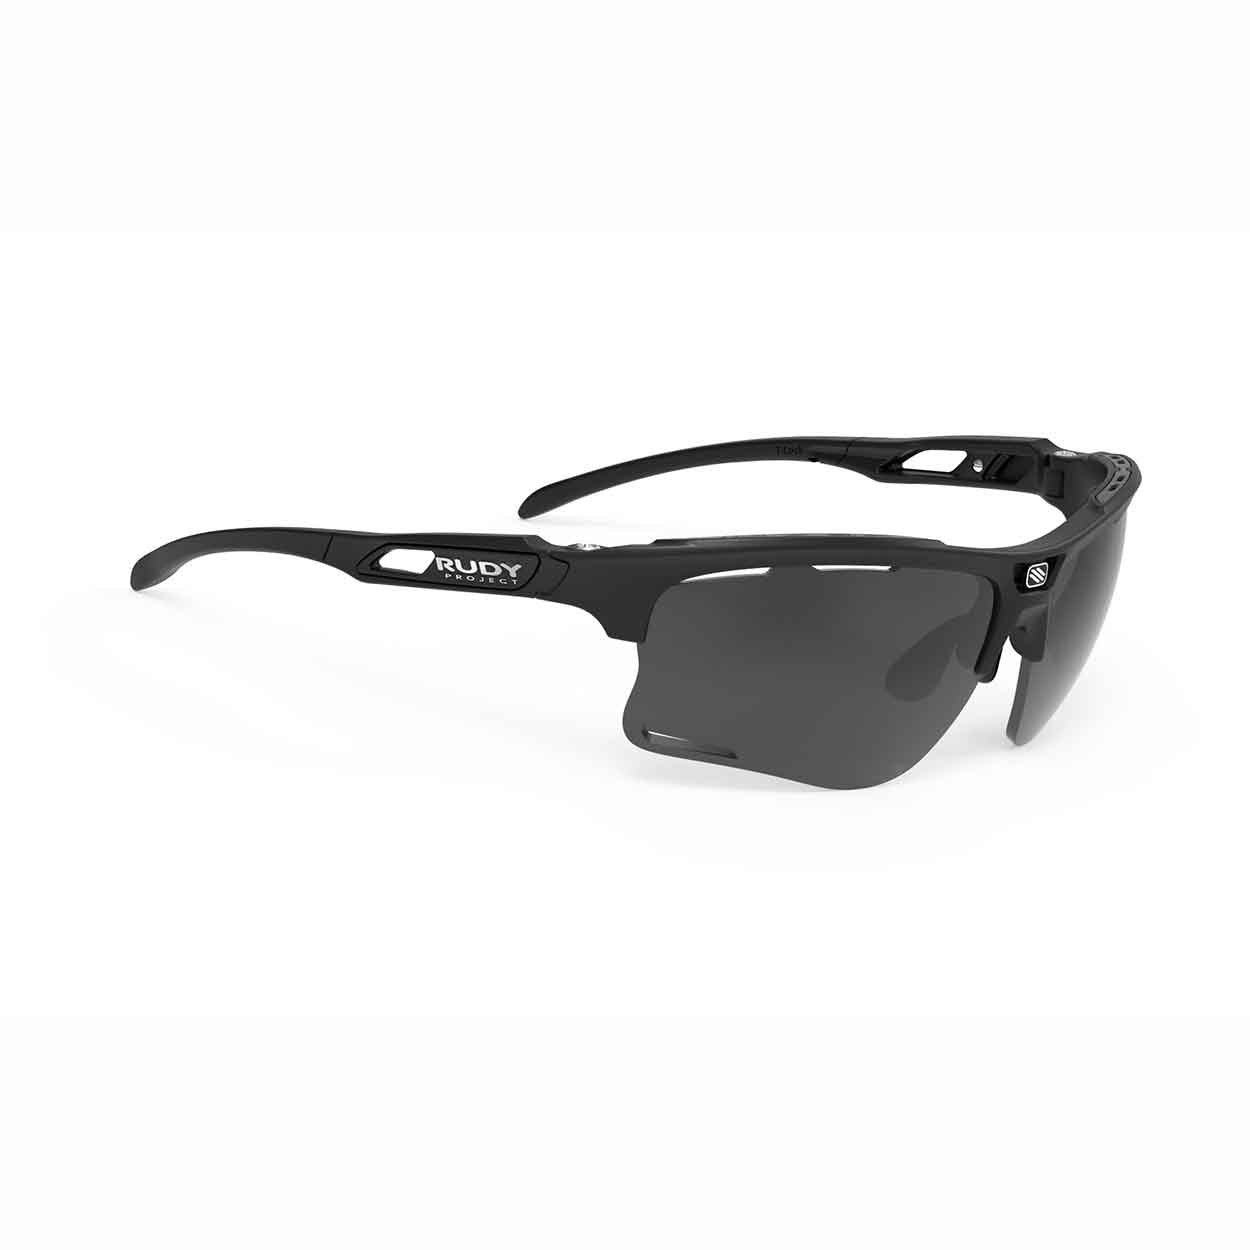 Rudy Project Keyblade Sportbrille